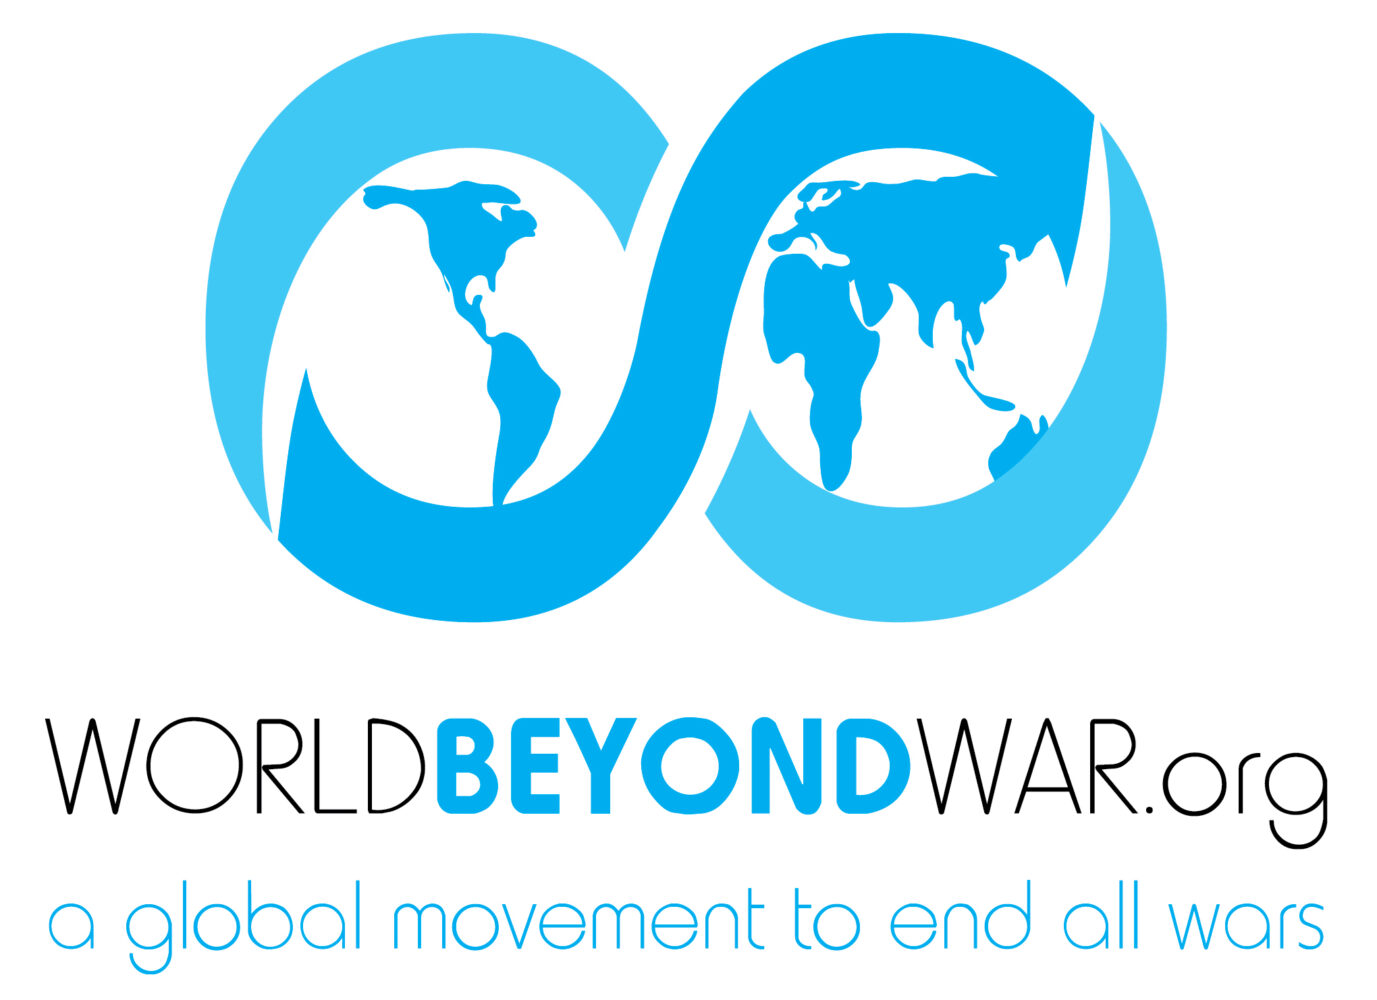 The logo for World BEYOND War with the catchphrase, "a global movement to end all wars"